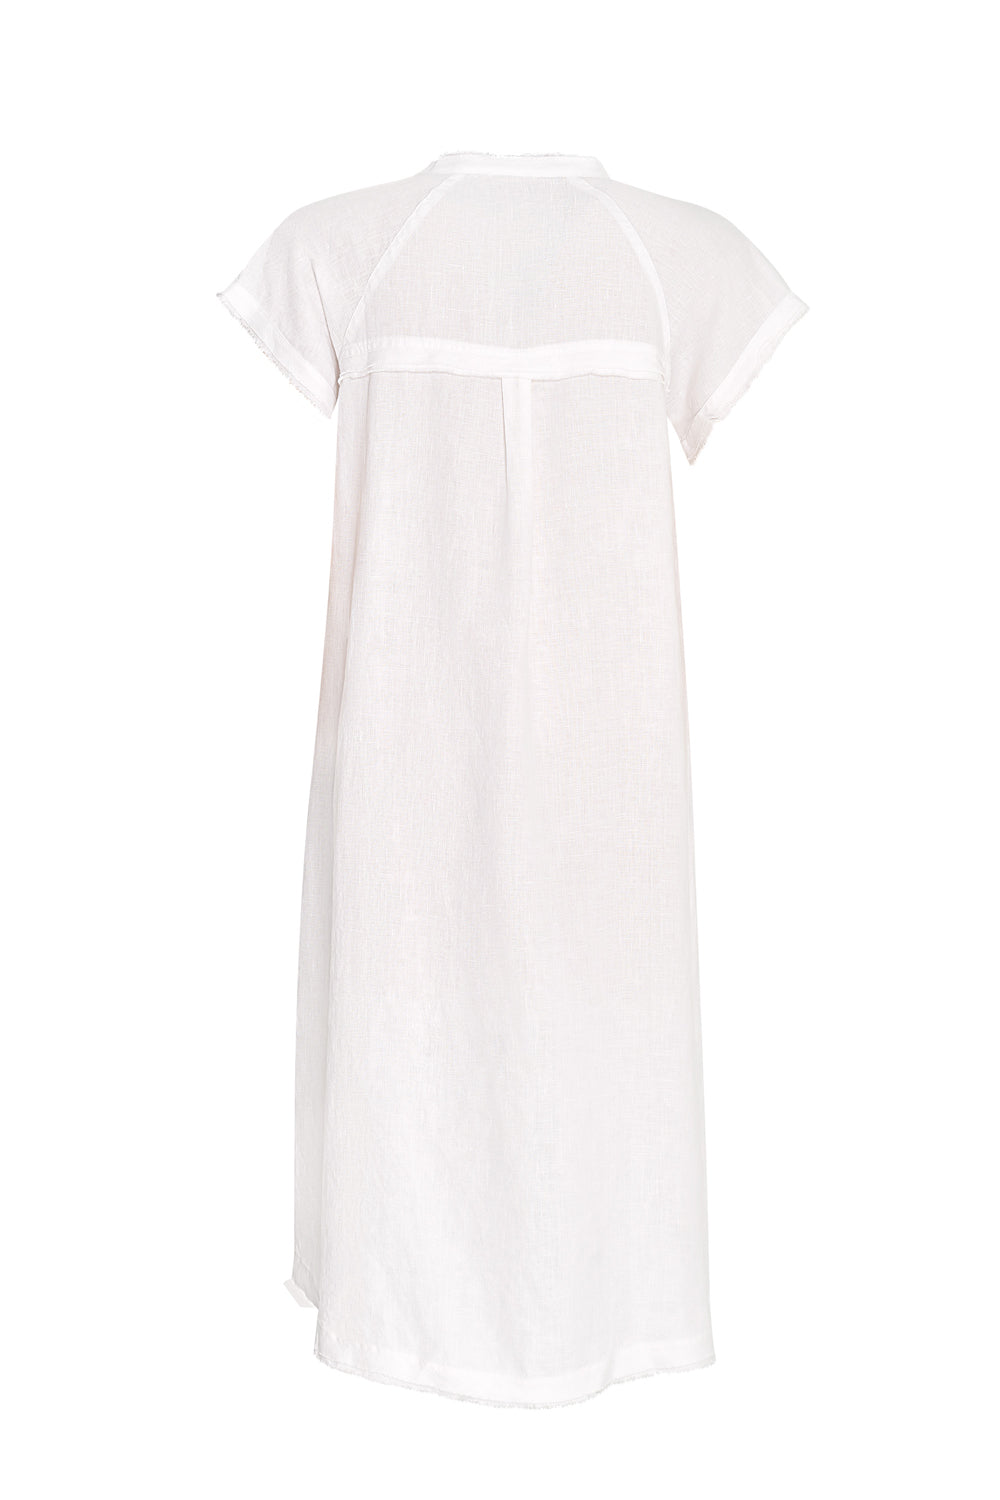 Madly Sweetly by Loobies Story Linen Let Live Shift Dress White Ms832pl